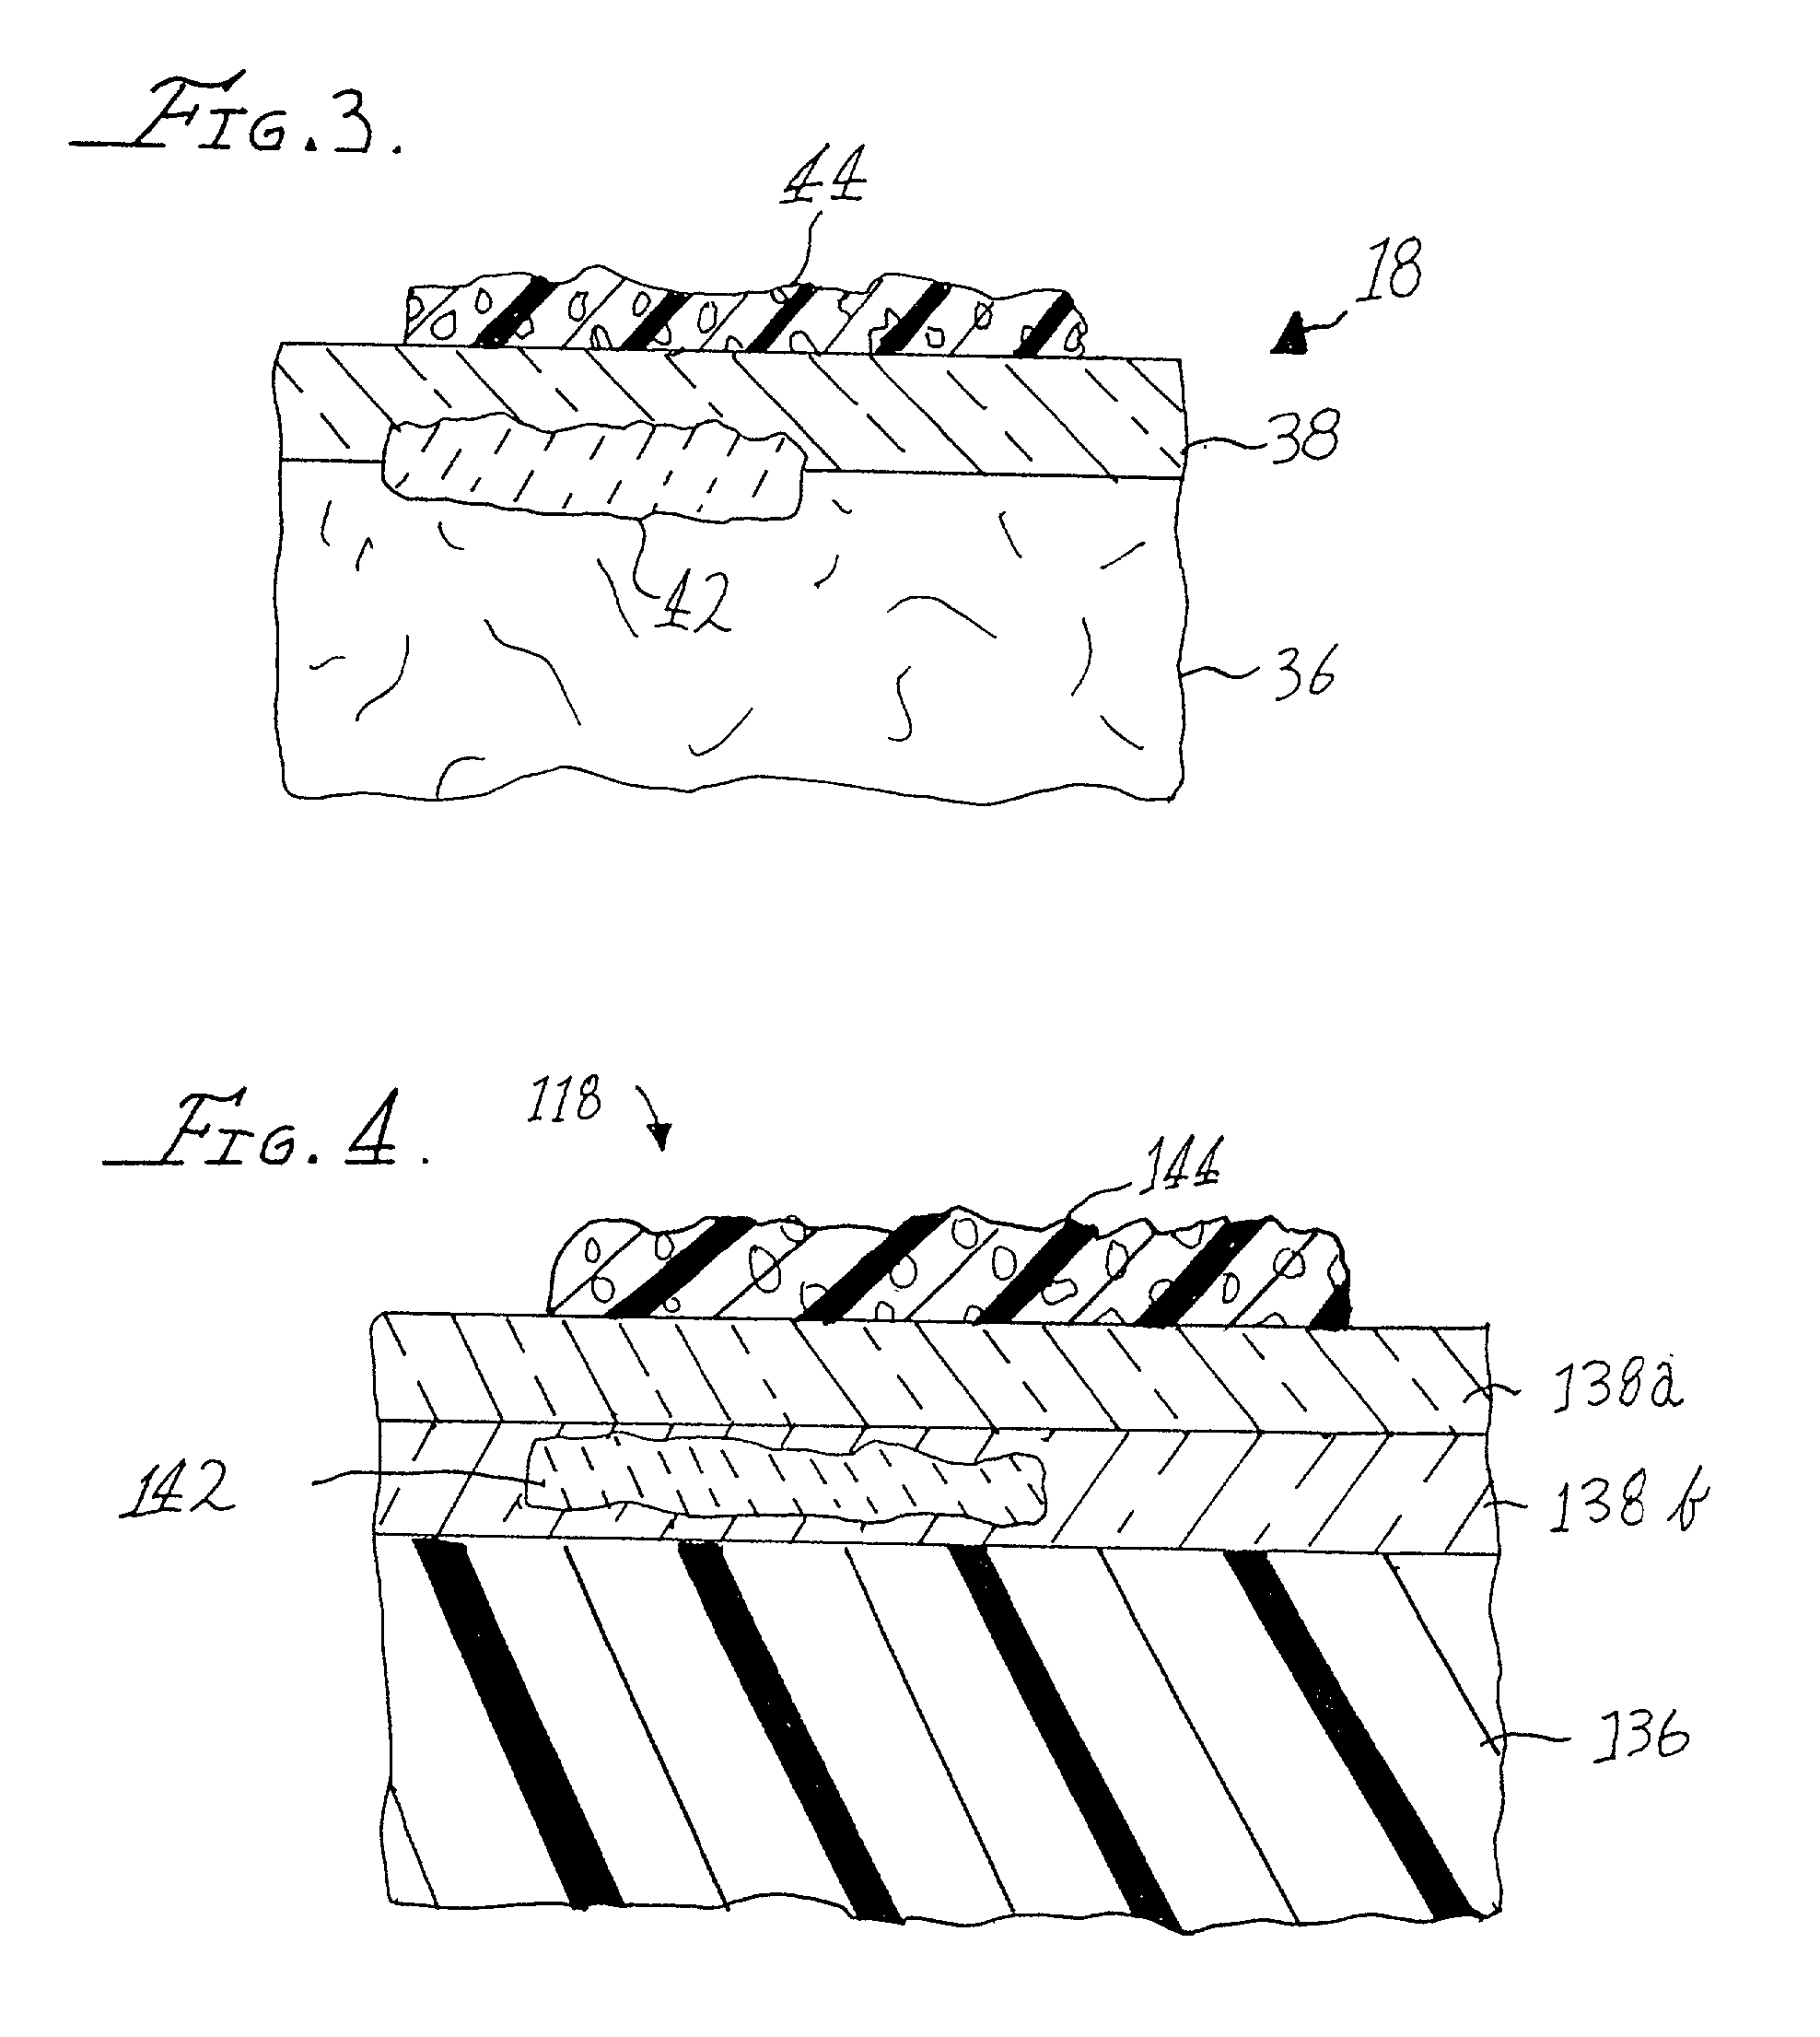 Printing system for application of different ink types to create a security document